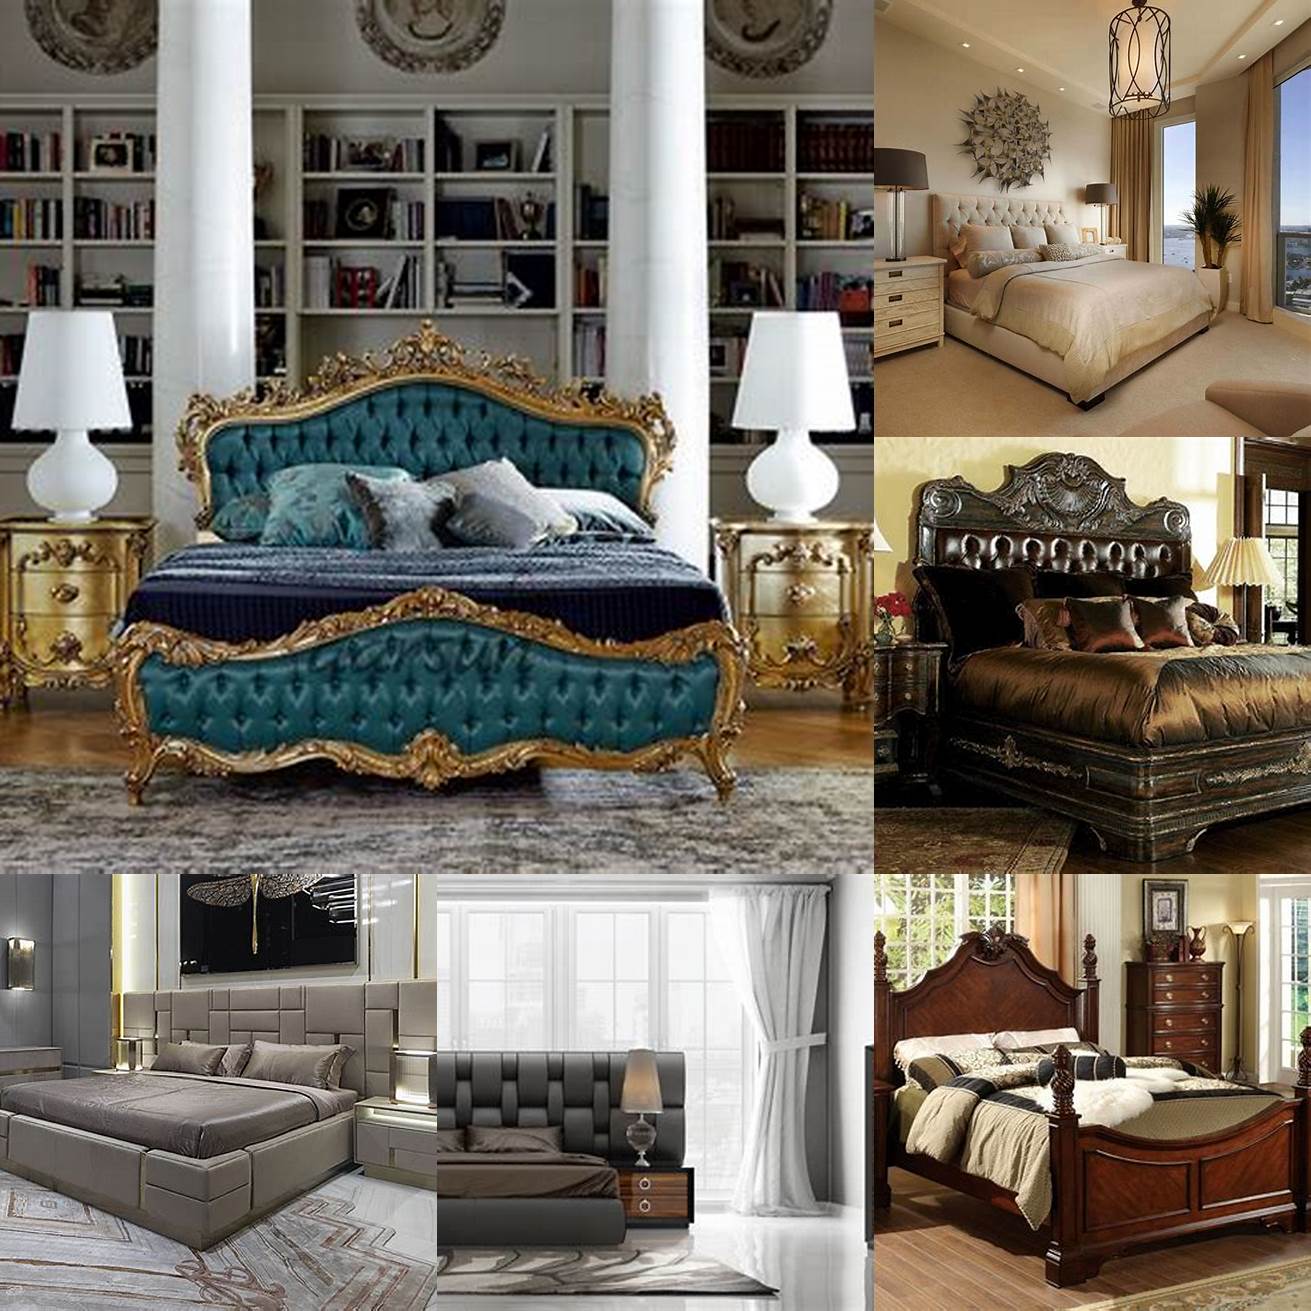 Think long-term Finally think long-term when choosing a luxury bedroom set While you may be drawn to trendy designs its important to choose a set that will stand the test of time